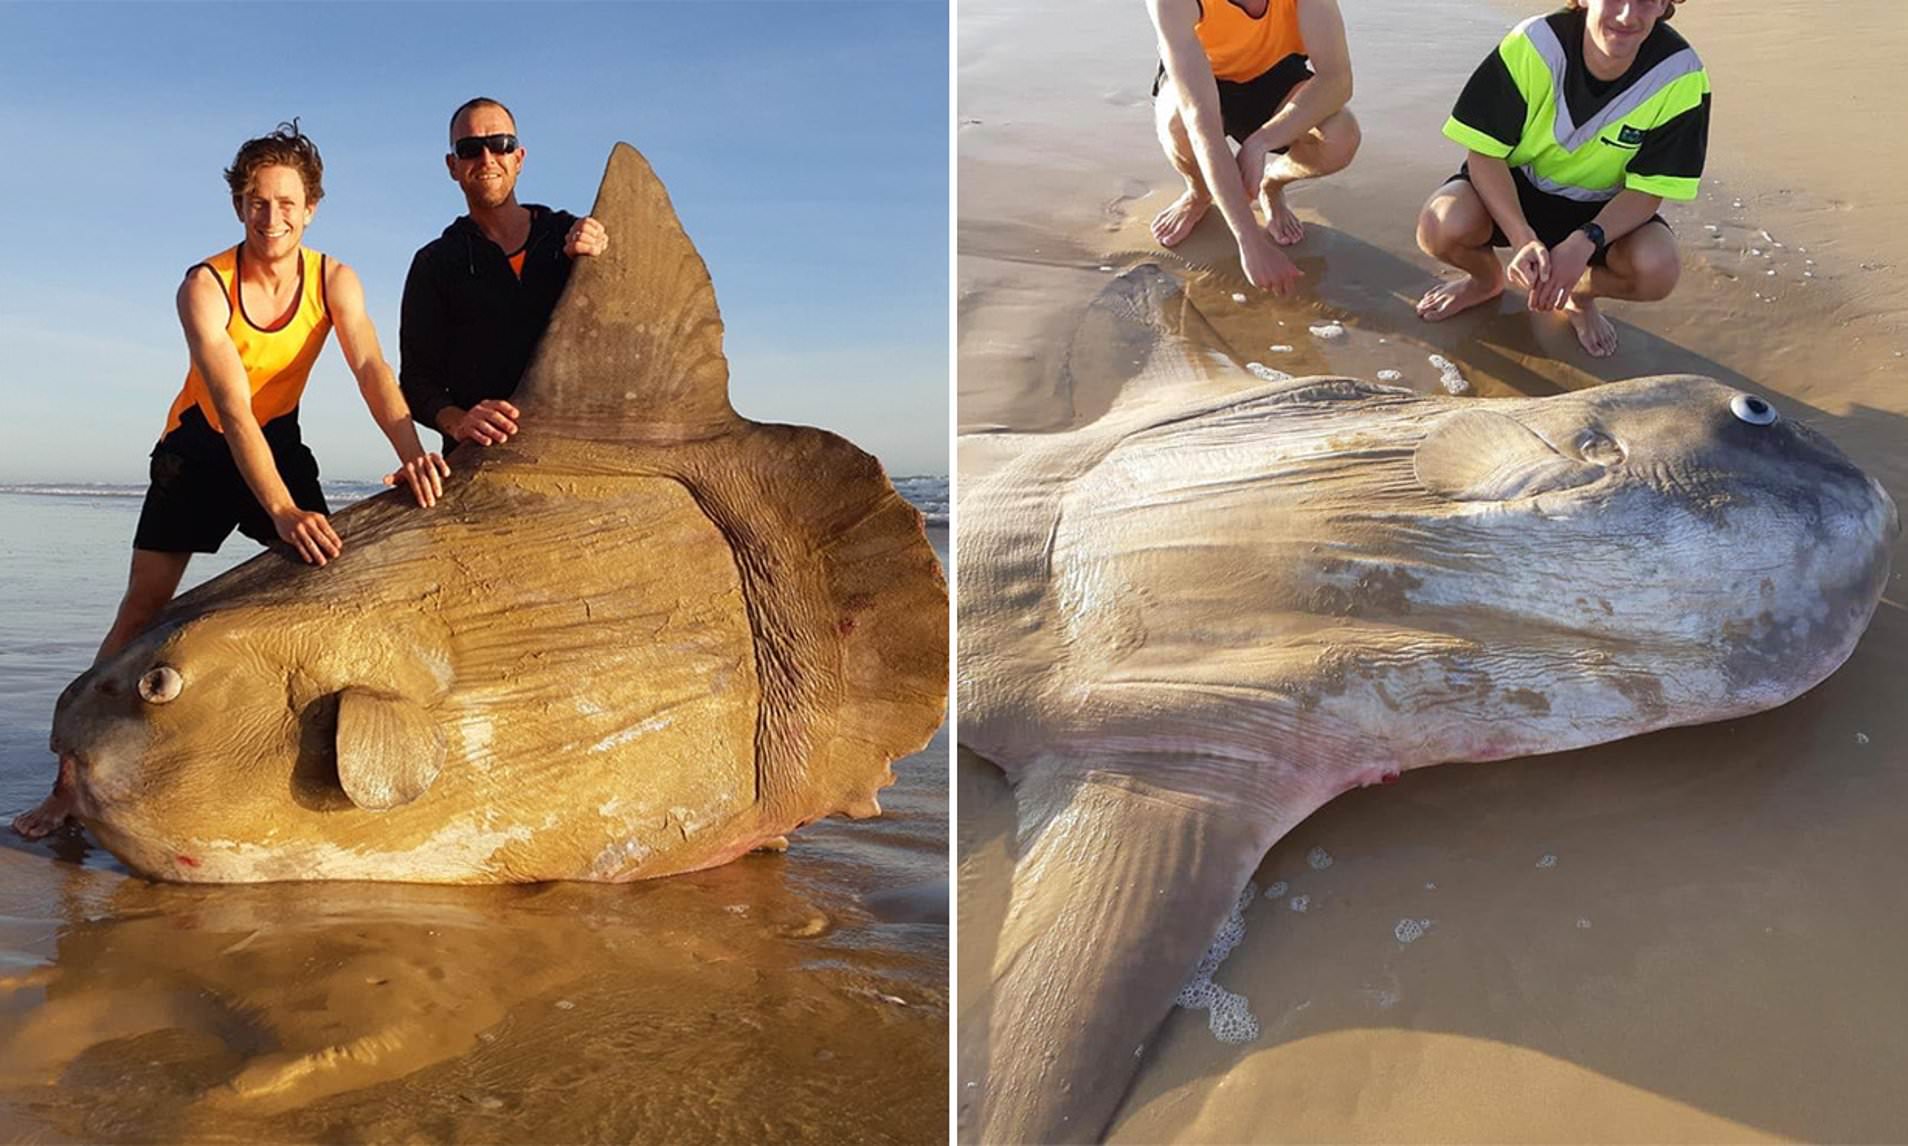 Giant sunfish is washed up on a deserted beach in South Australia | Daily Mail Online